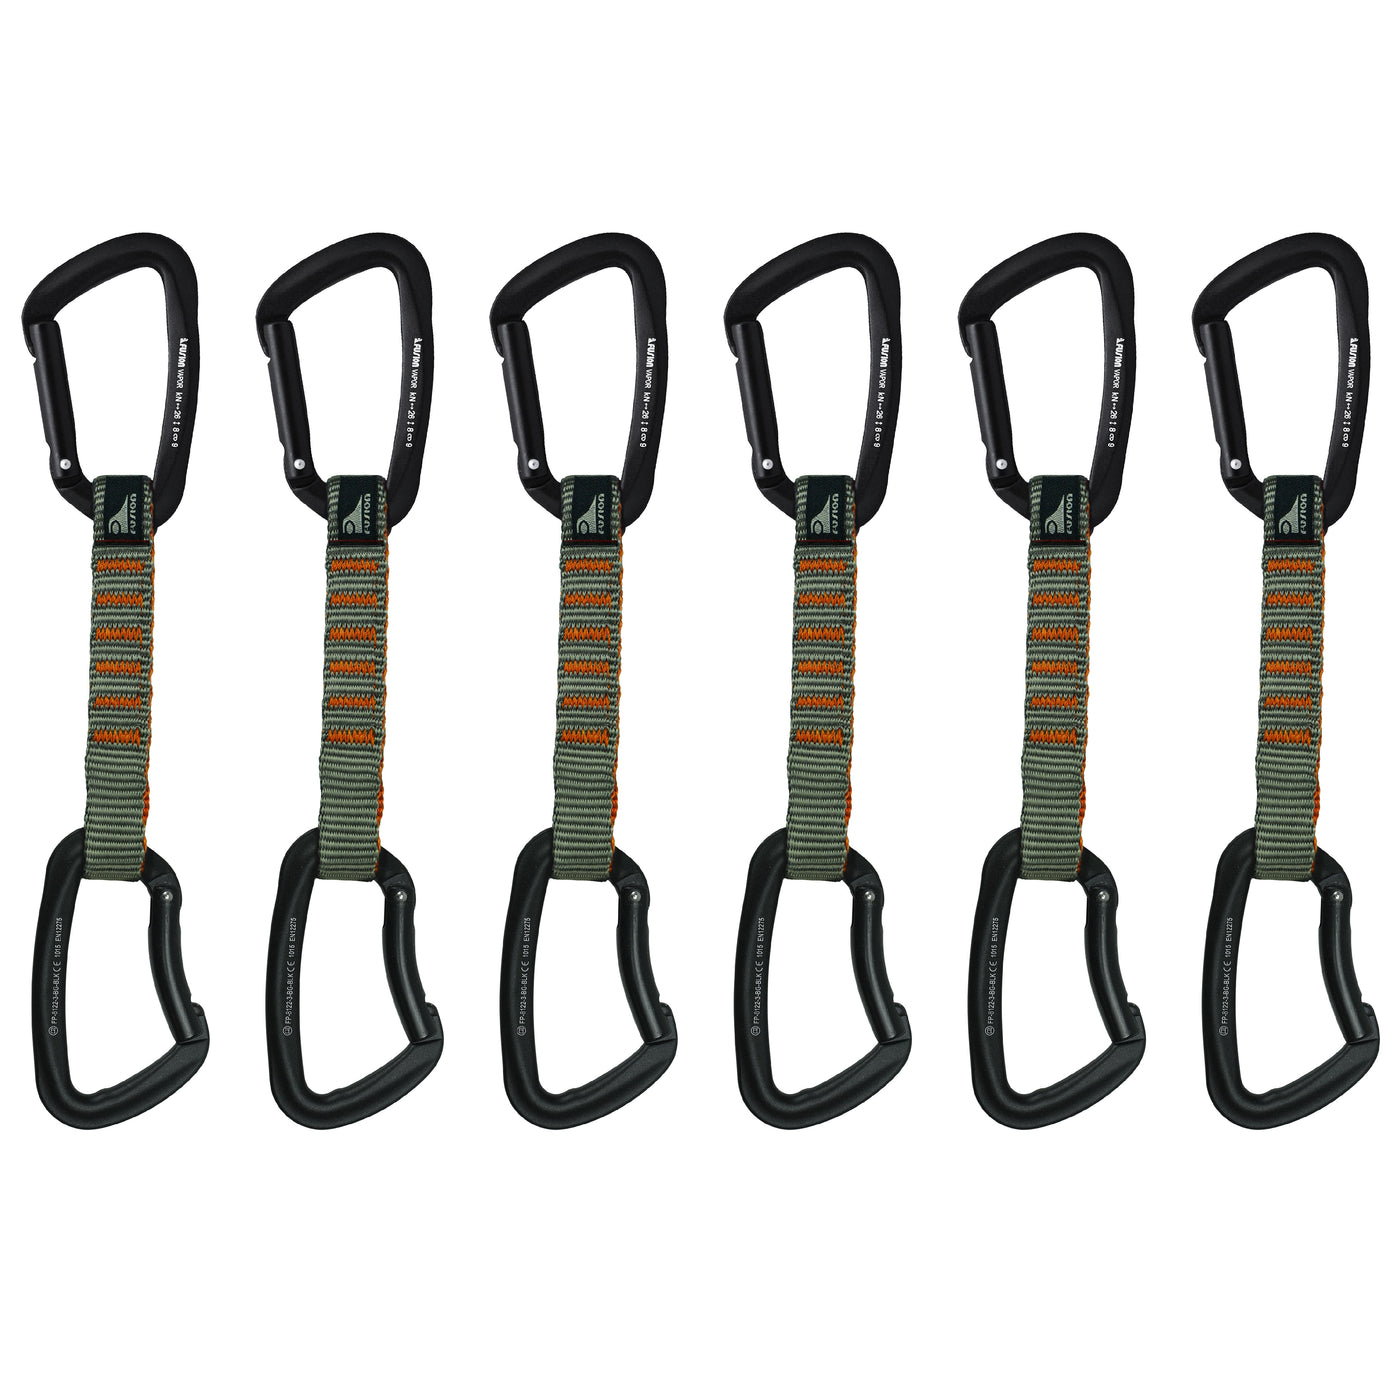 Quickdraw Set – Lightweight and Perfect for most Climbing Applications 